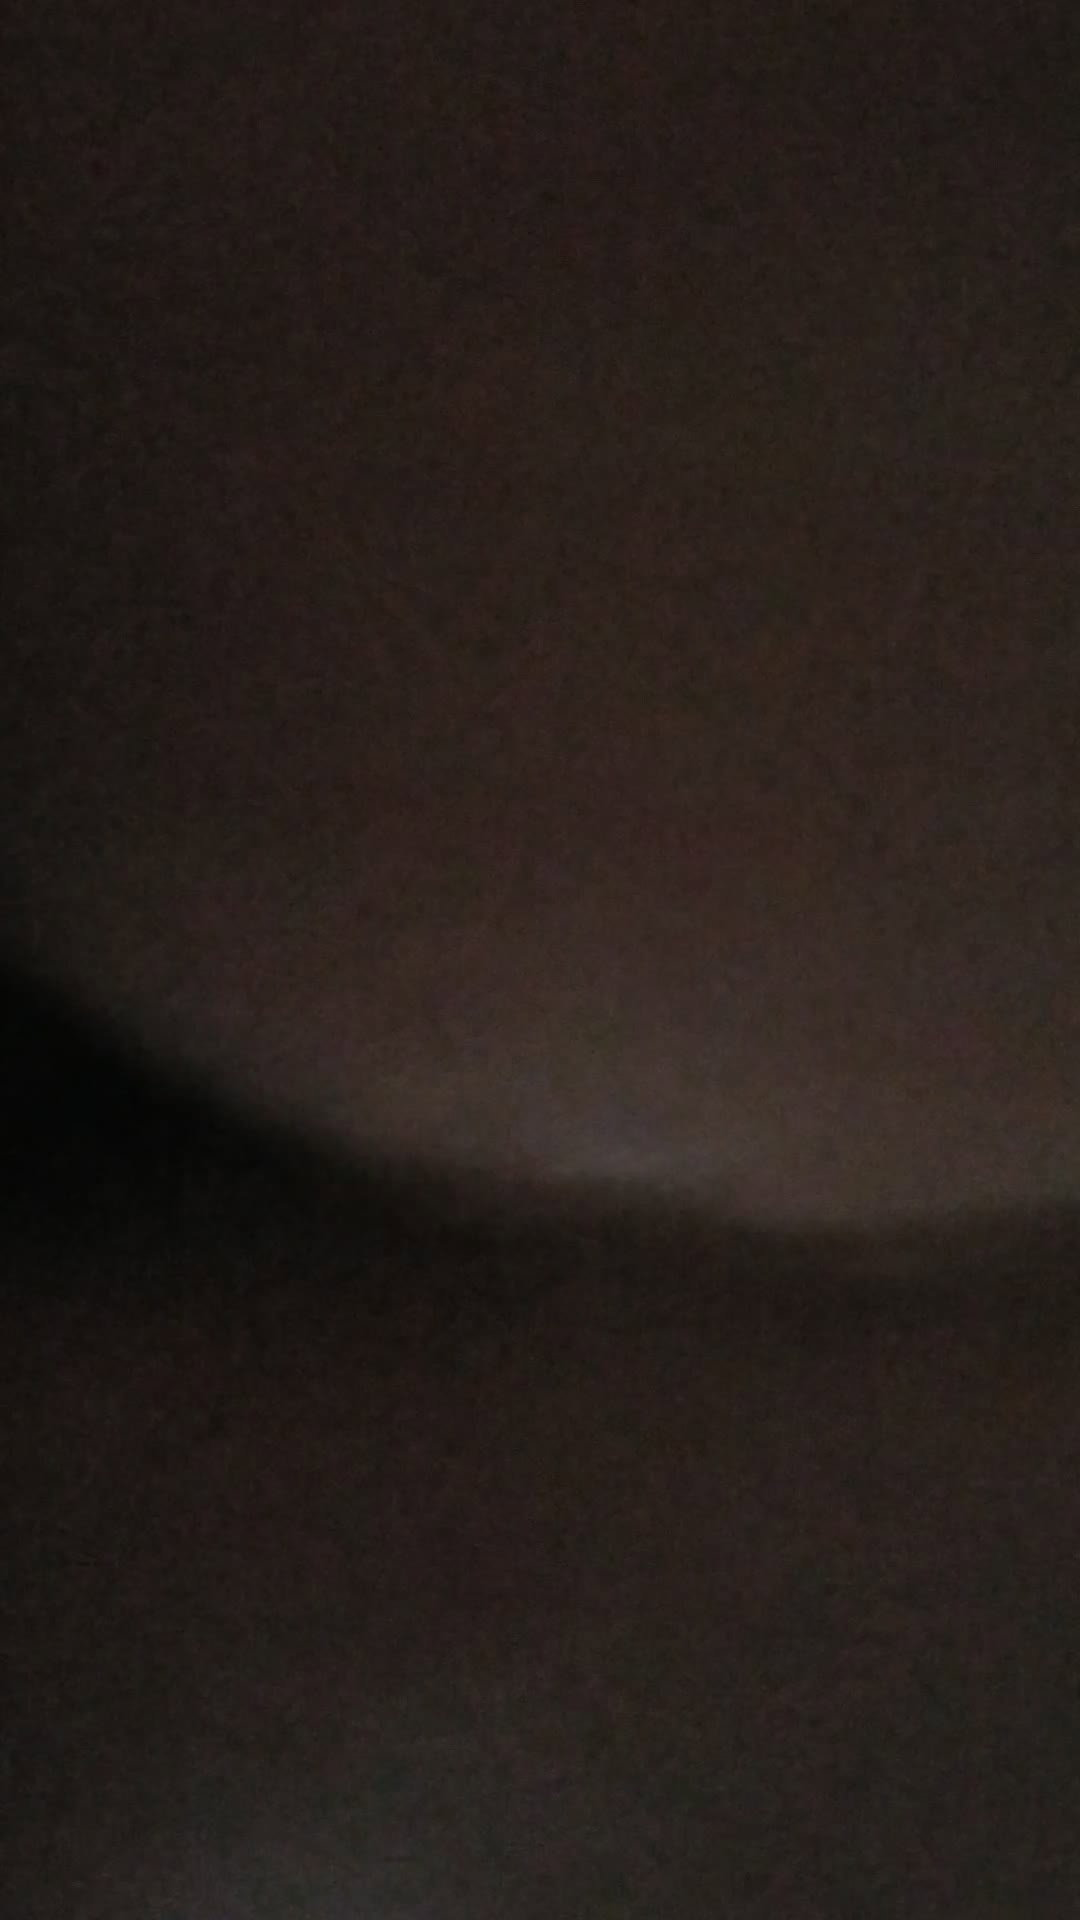 Video by Mrs. & Mr. H with the username @MrsHLove,  March 25, 2021 at 6:33 PM and the text says 'You can hear that I really enjoyed hubby fucking me up the ass 😋😉😊'